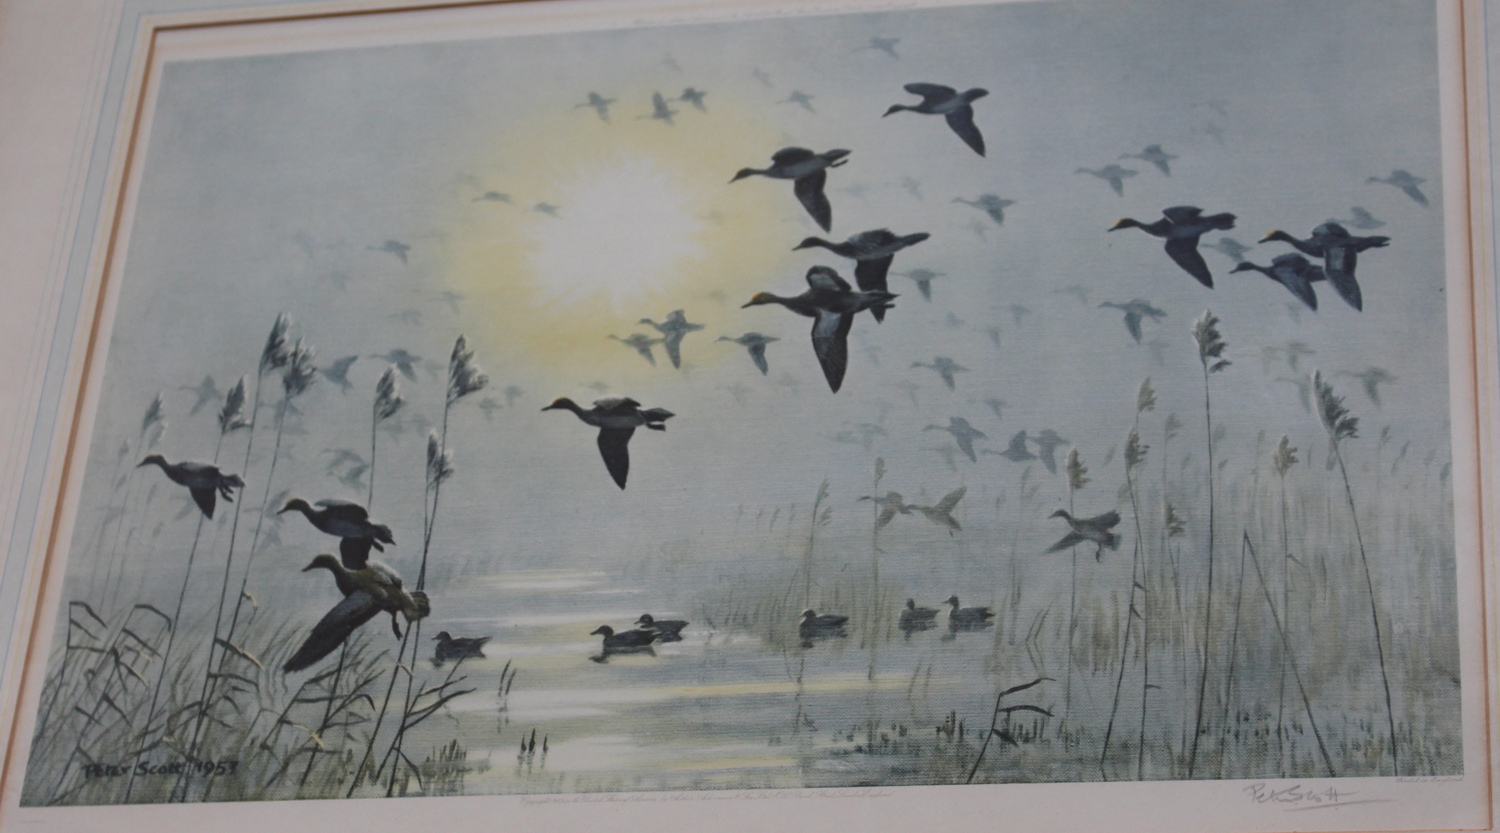 Peter Scott - 'The Wash at Dawn, Pinkfeet', colour print, signed in pencil recto, titled label - Image 5 of 10